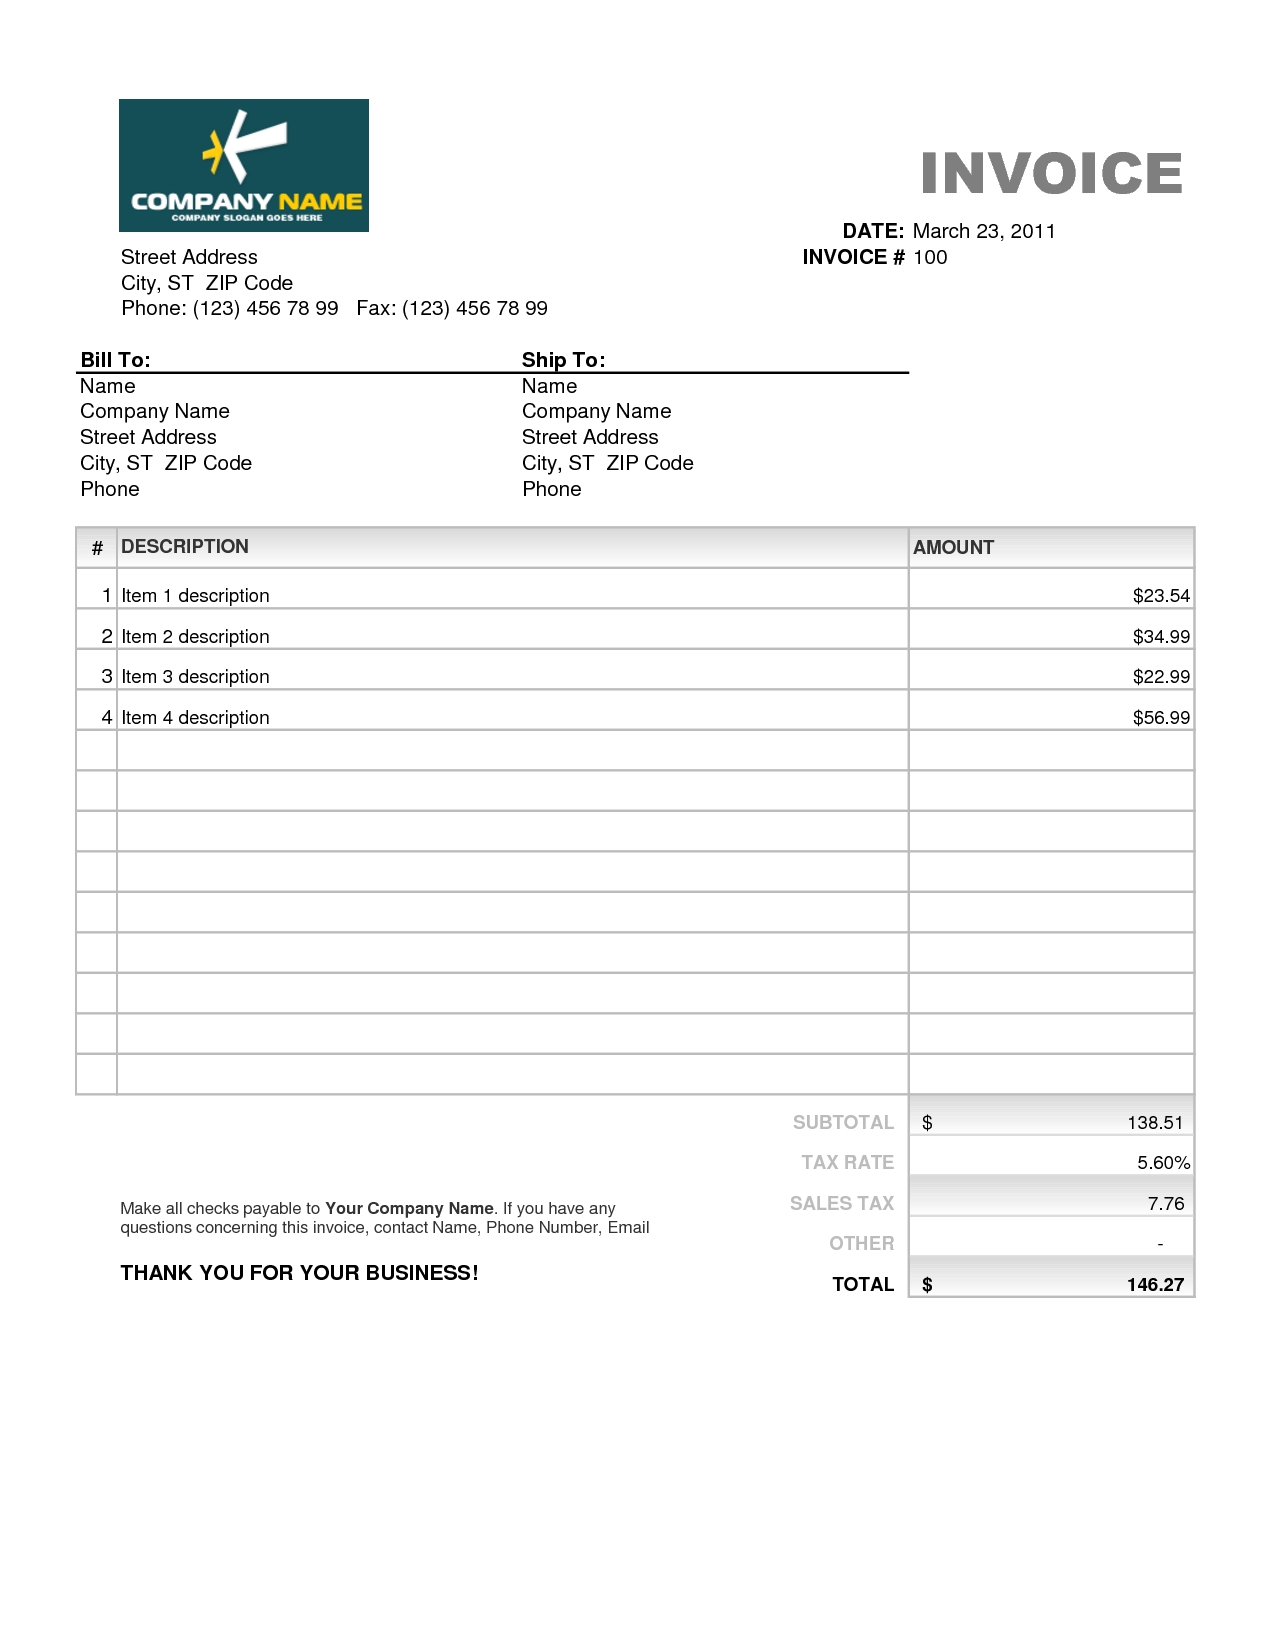 invoice downloads express invoice free edition download free invoice template pdf free download